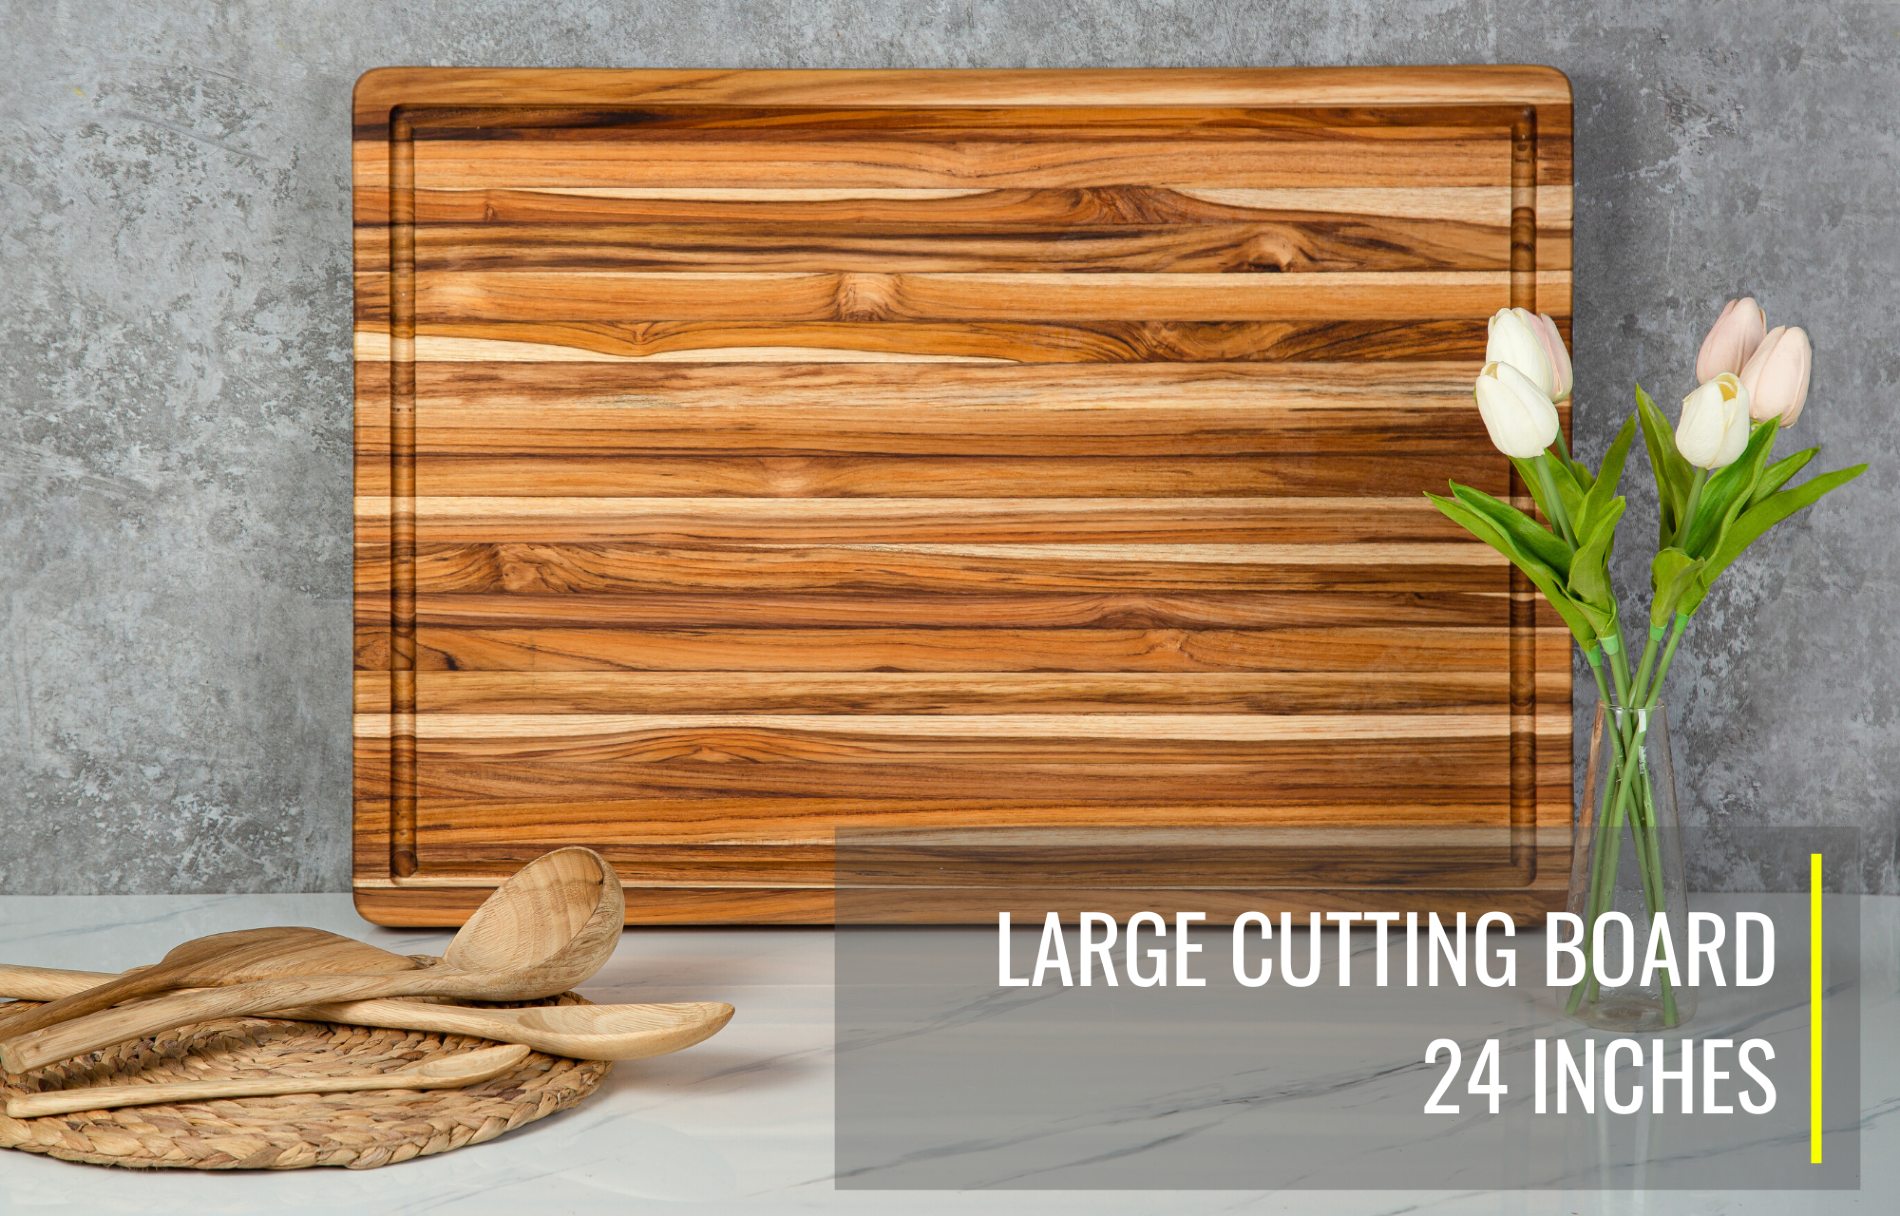 BEEFURNI Teak Wood Cutting Board with Hand Grip, Small Wooden Cutting  Boards for Kitchen, Small Chopping Board Wood, Kitchen Gifts, 1-Year